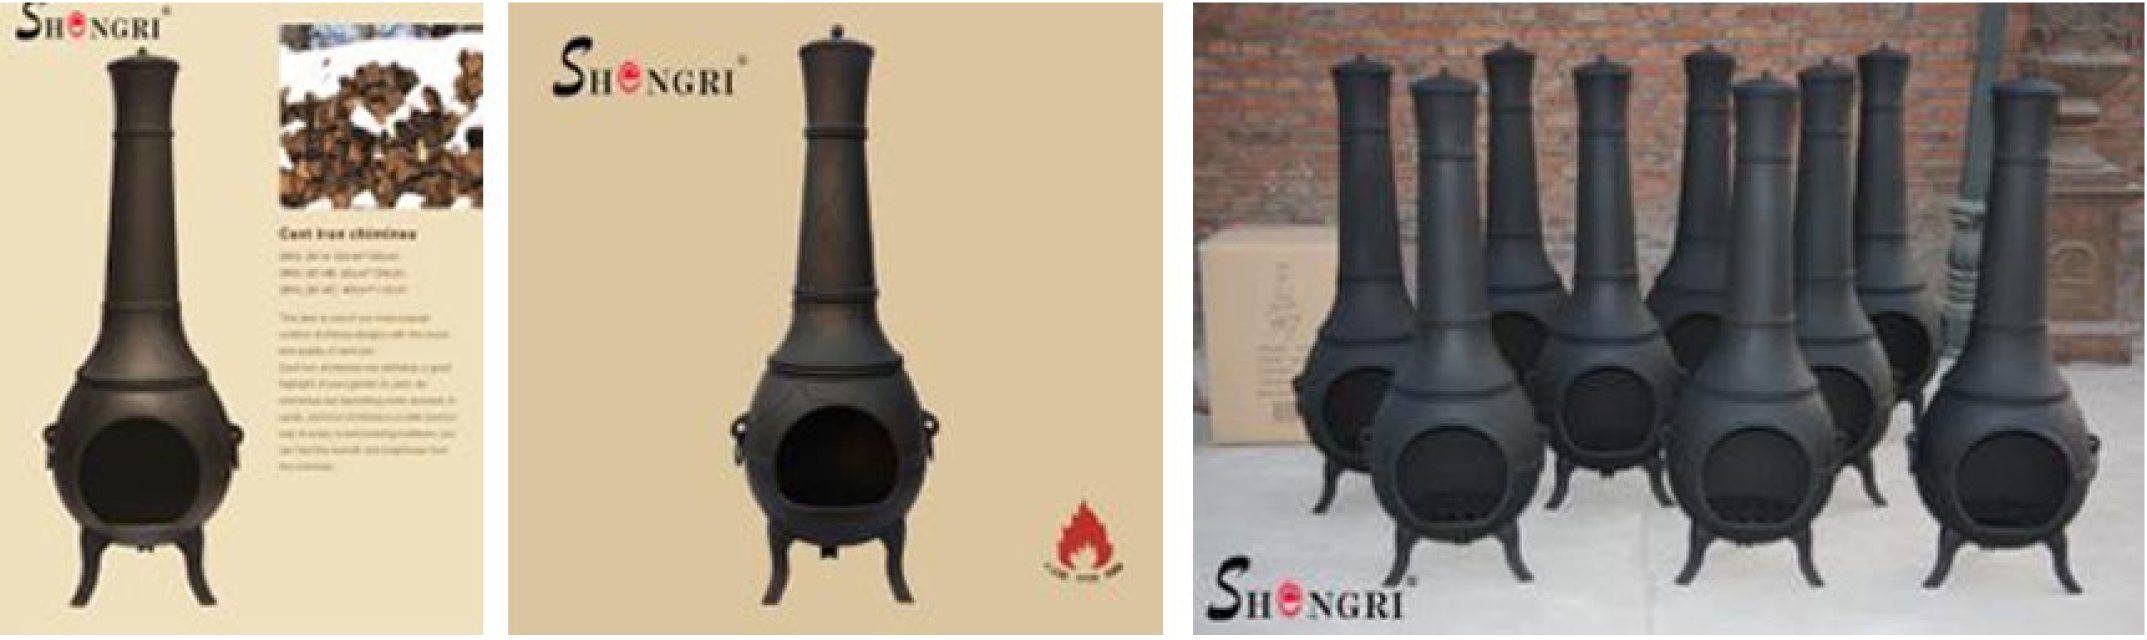 Cast Iron Chiminea/Stove - Perfect for Warmth and Cooking